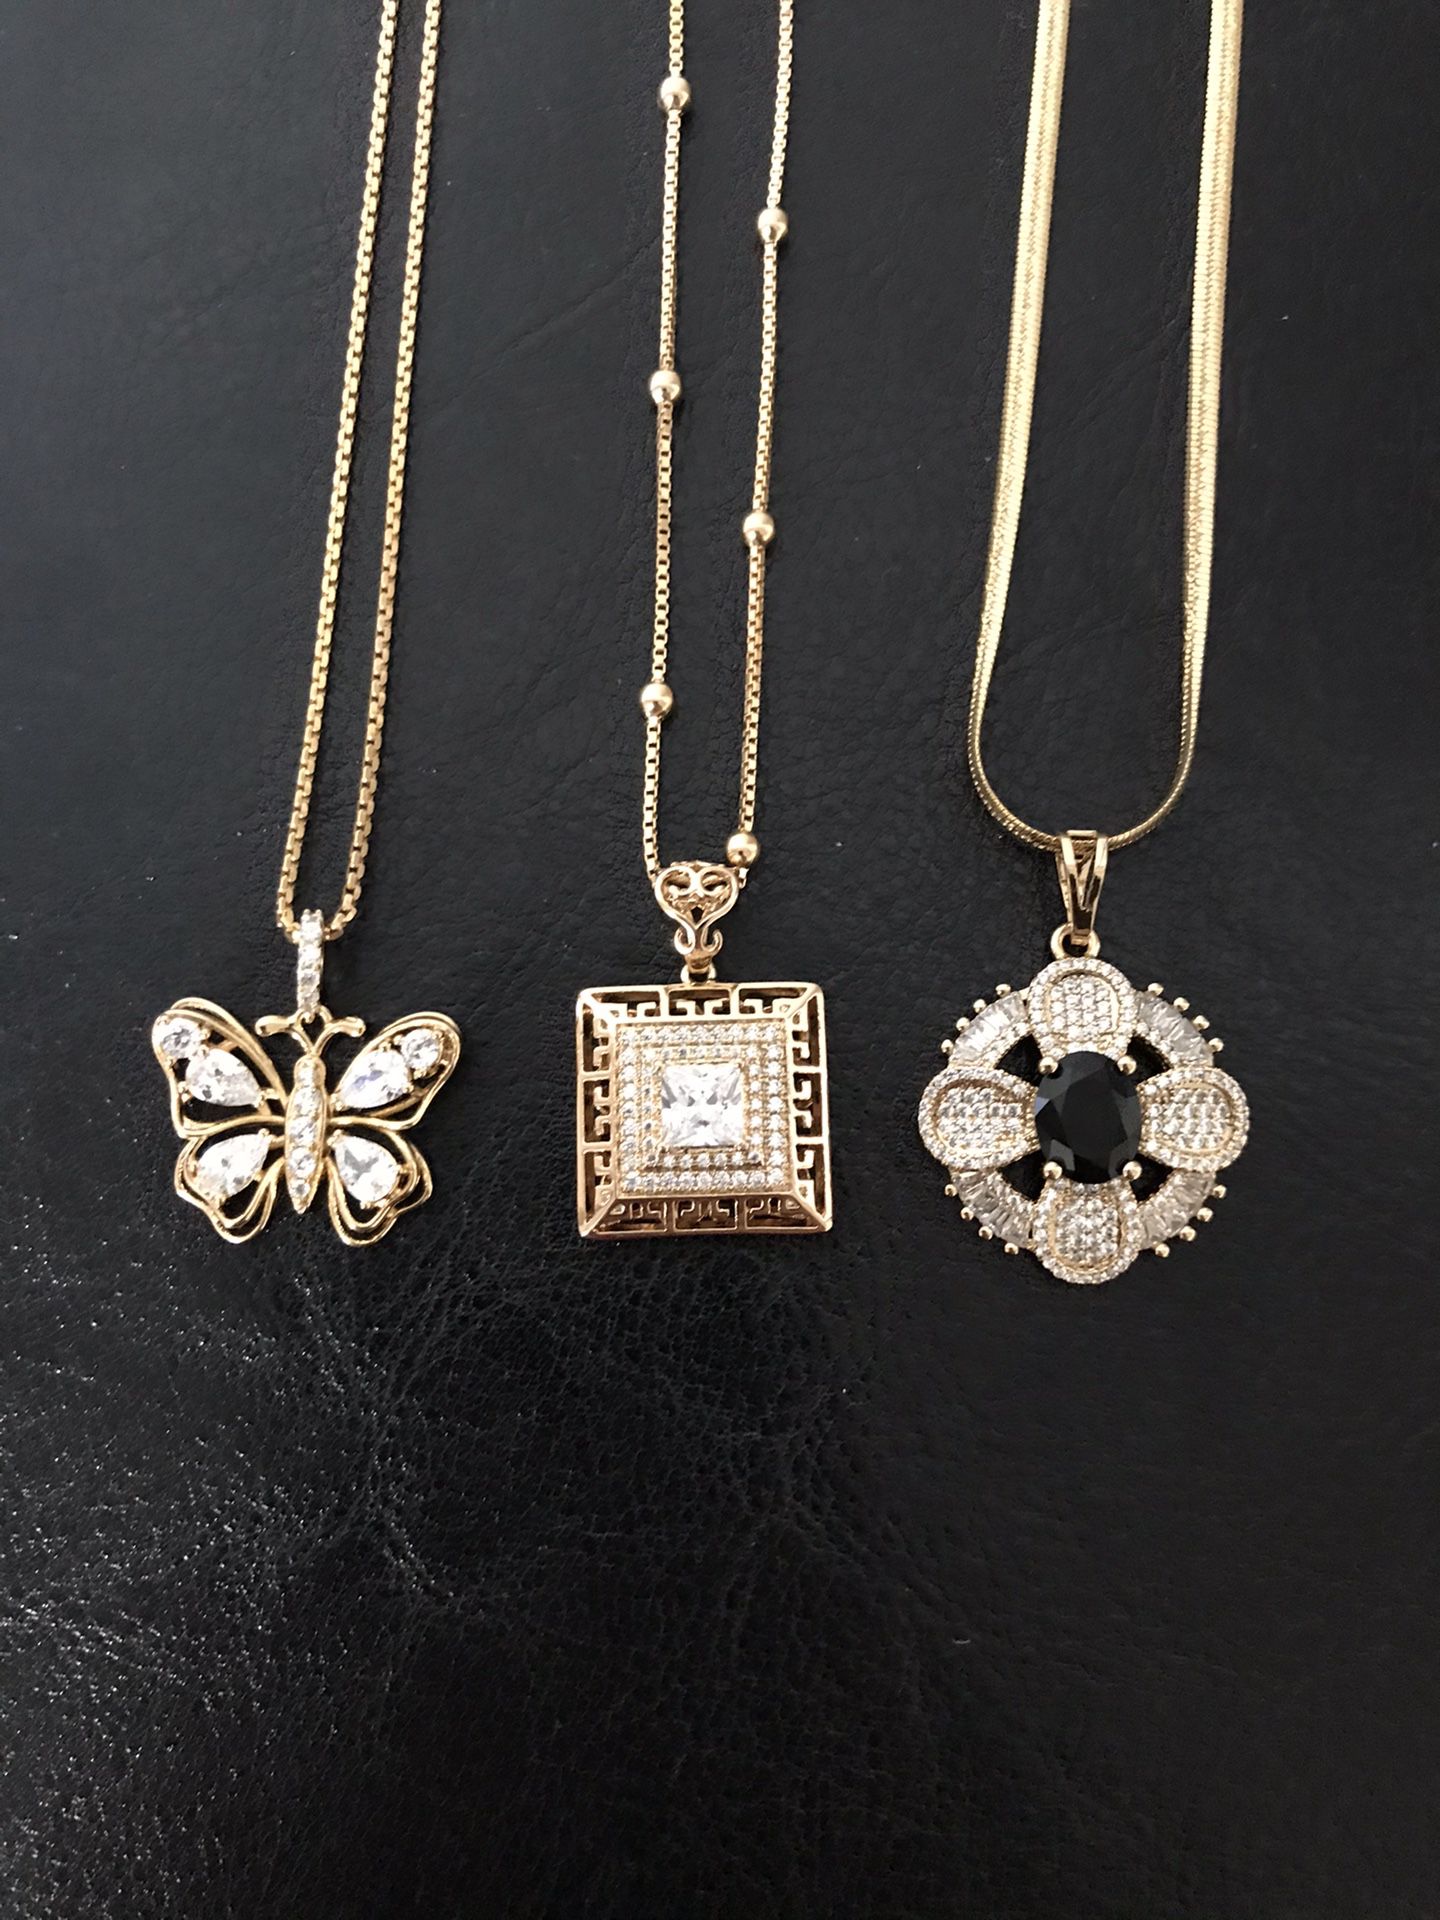 Gold plated pendant with chain ($13 each)